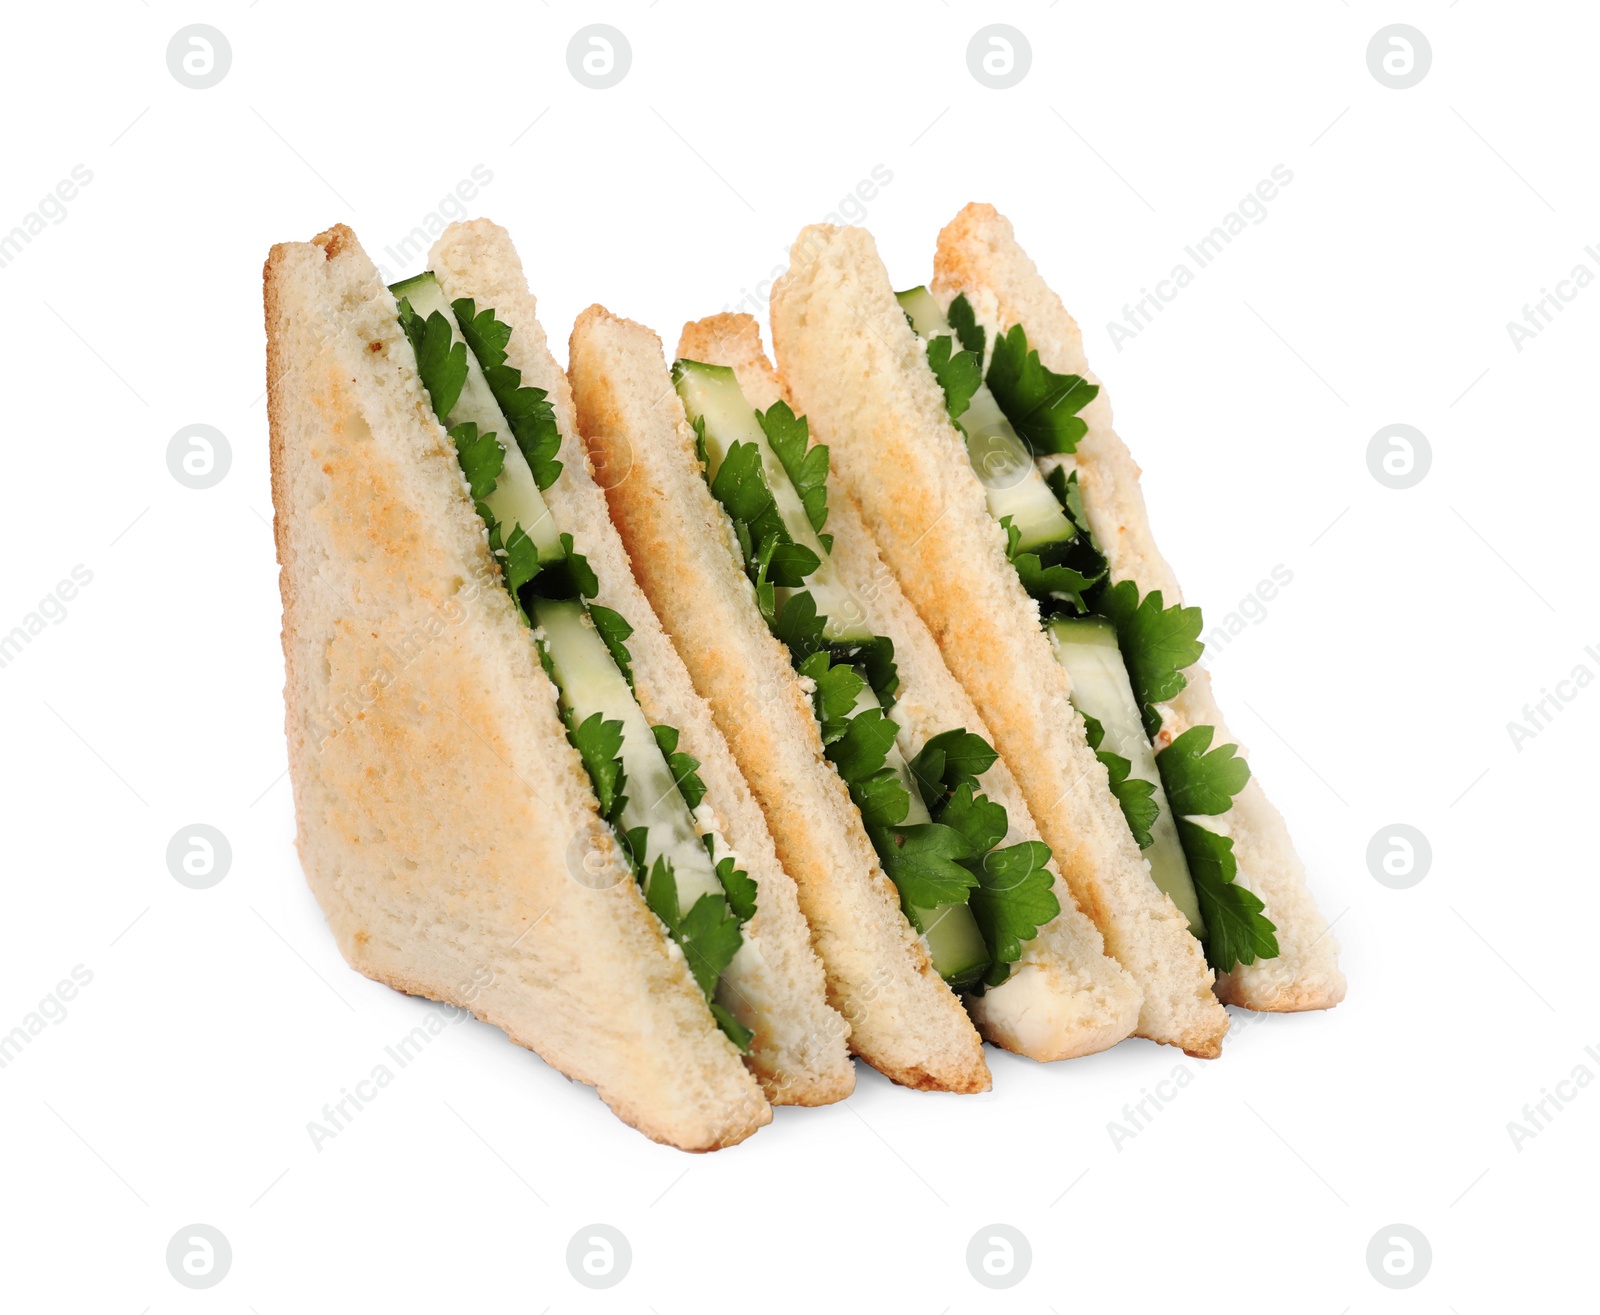 Photo of Tasty sandwiches with cucumber and parsley on white background